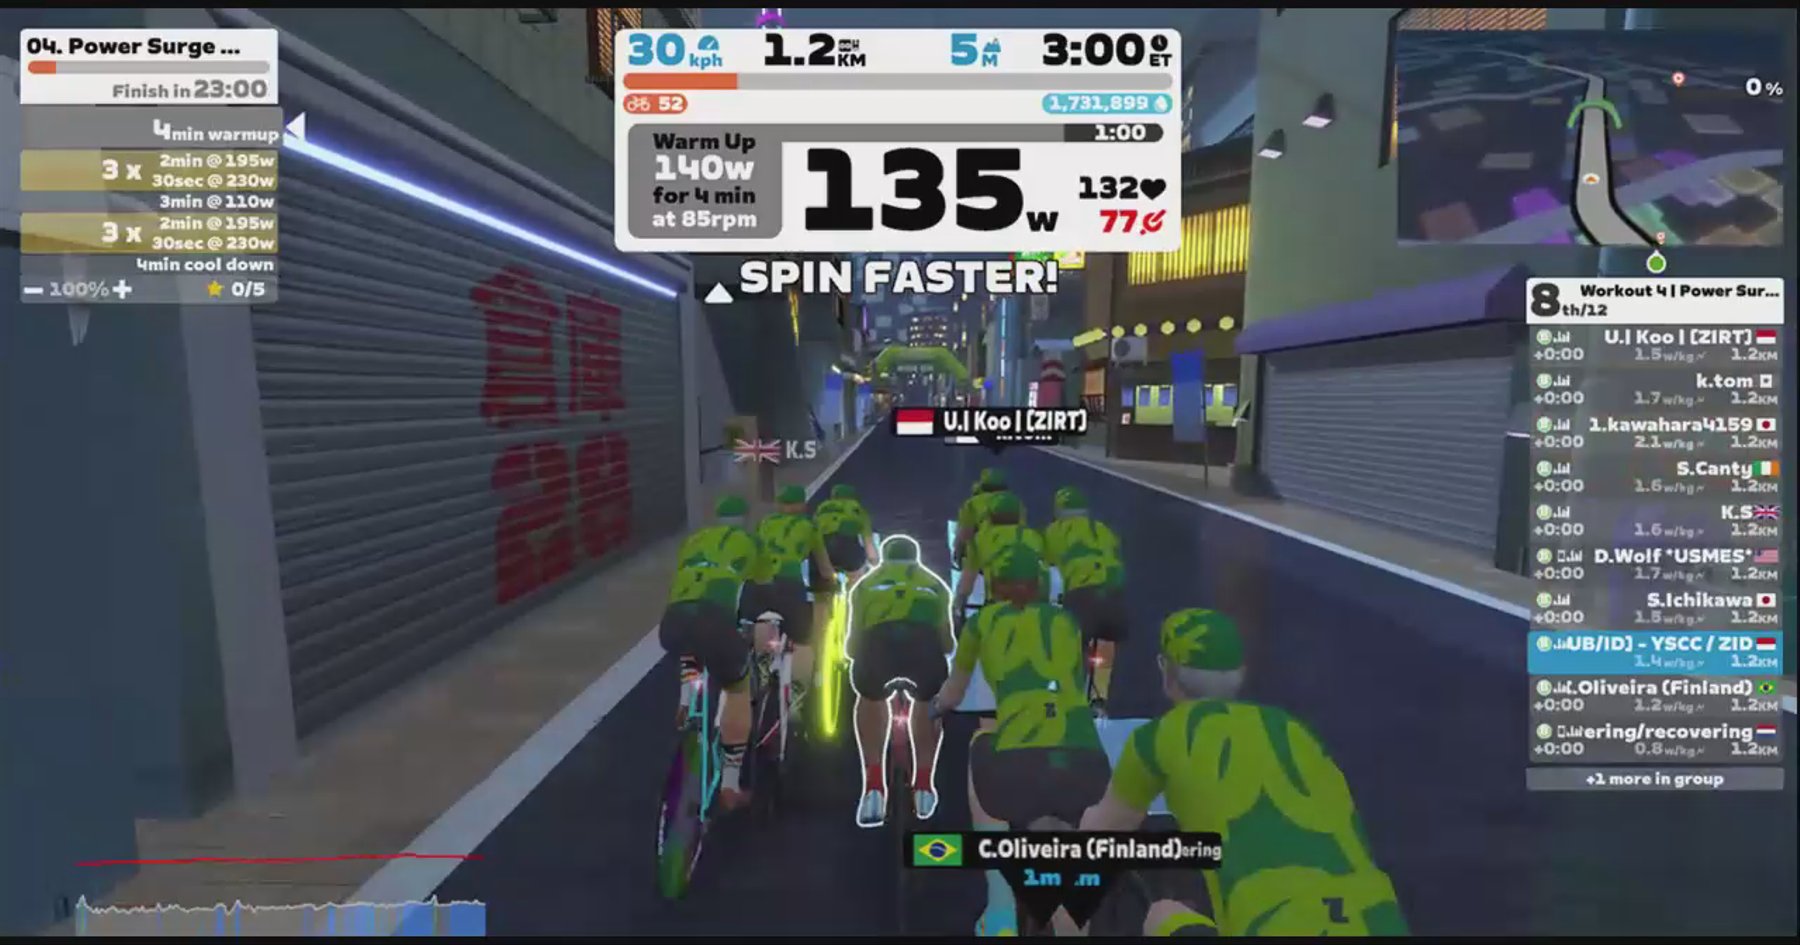 Zwift - Group Workout: Short - Power Surge  on Turf N Surf in Makuri Islands